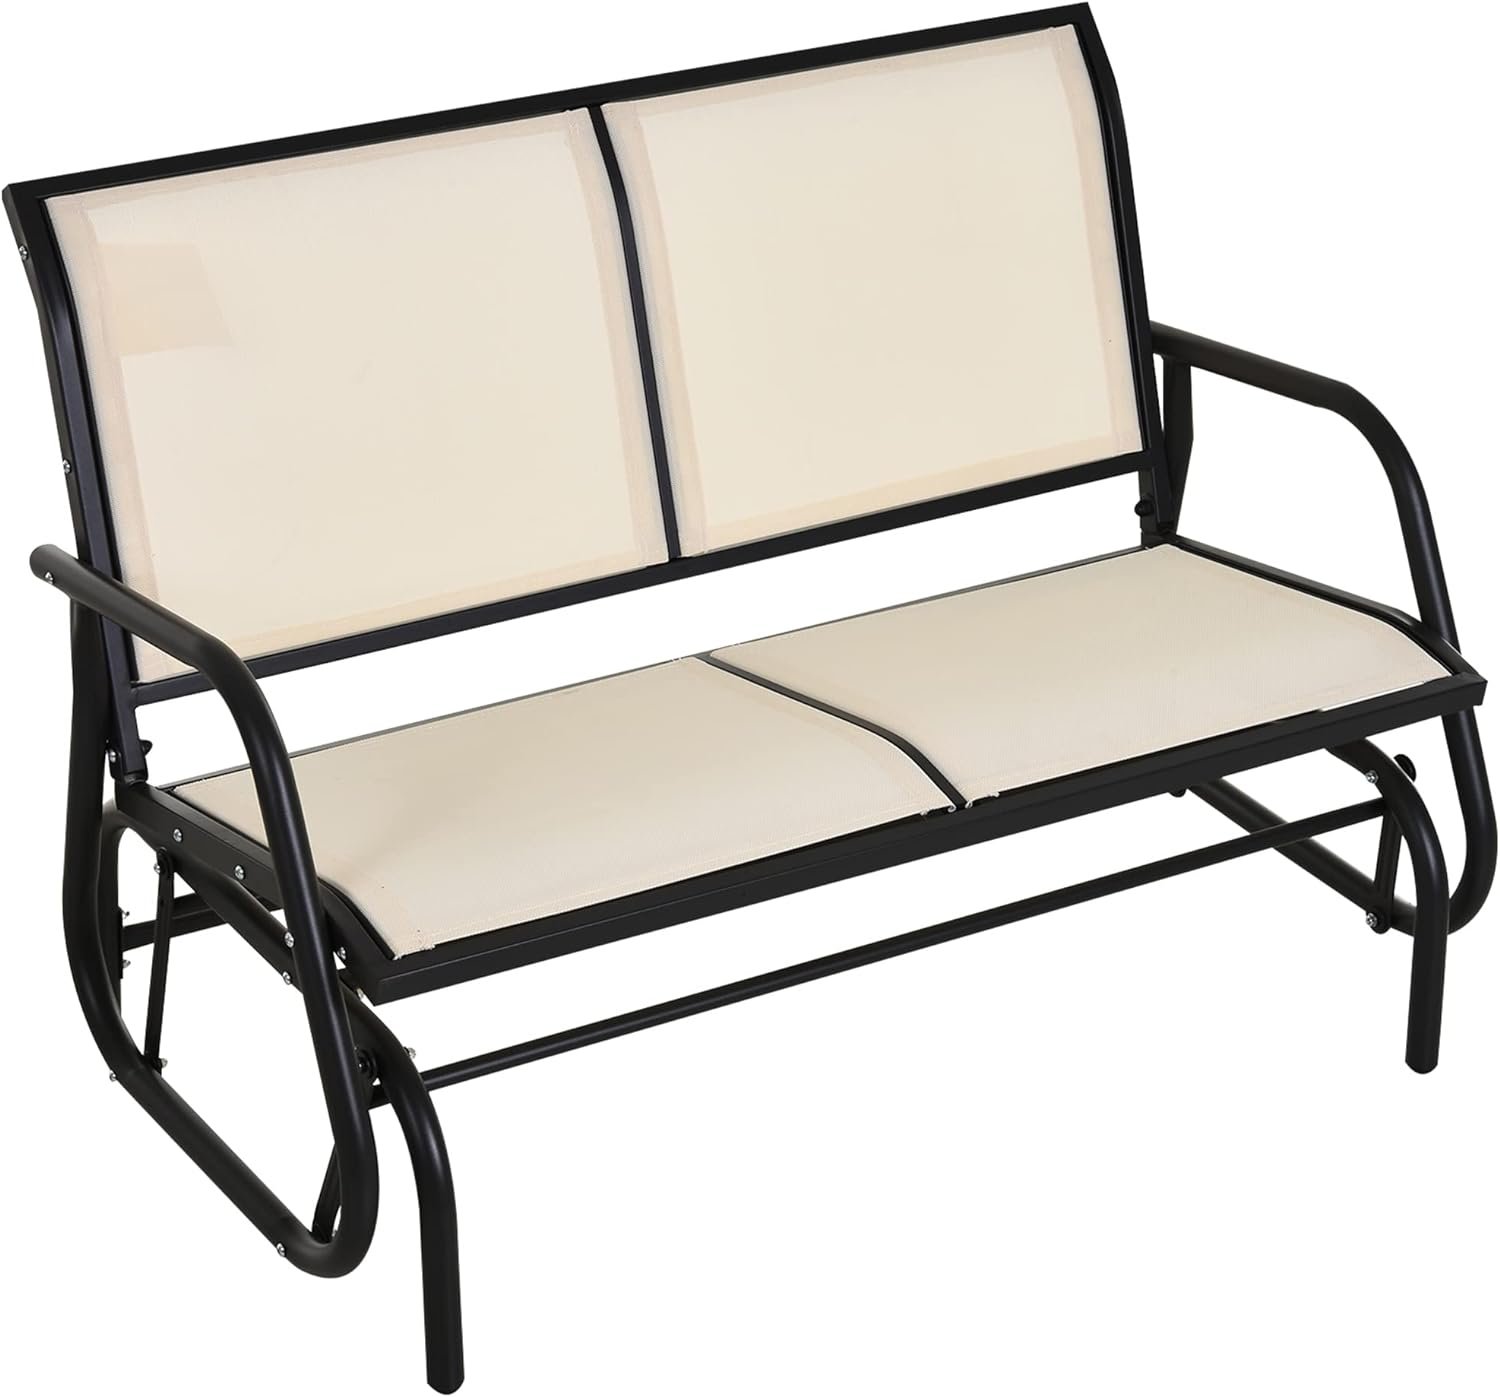 Outsunny Outdoor Glider Bench Review